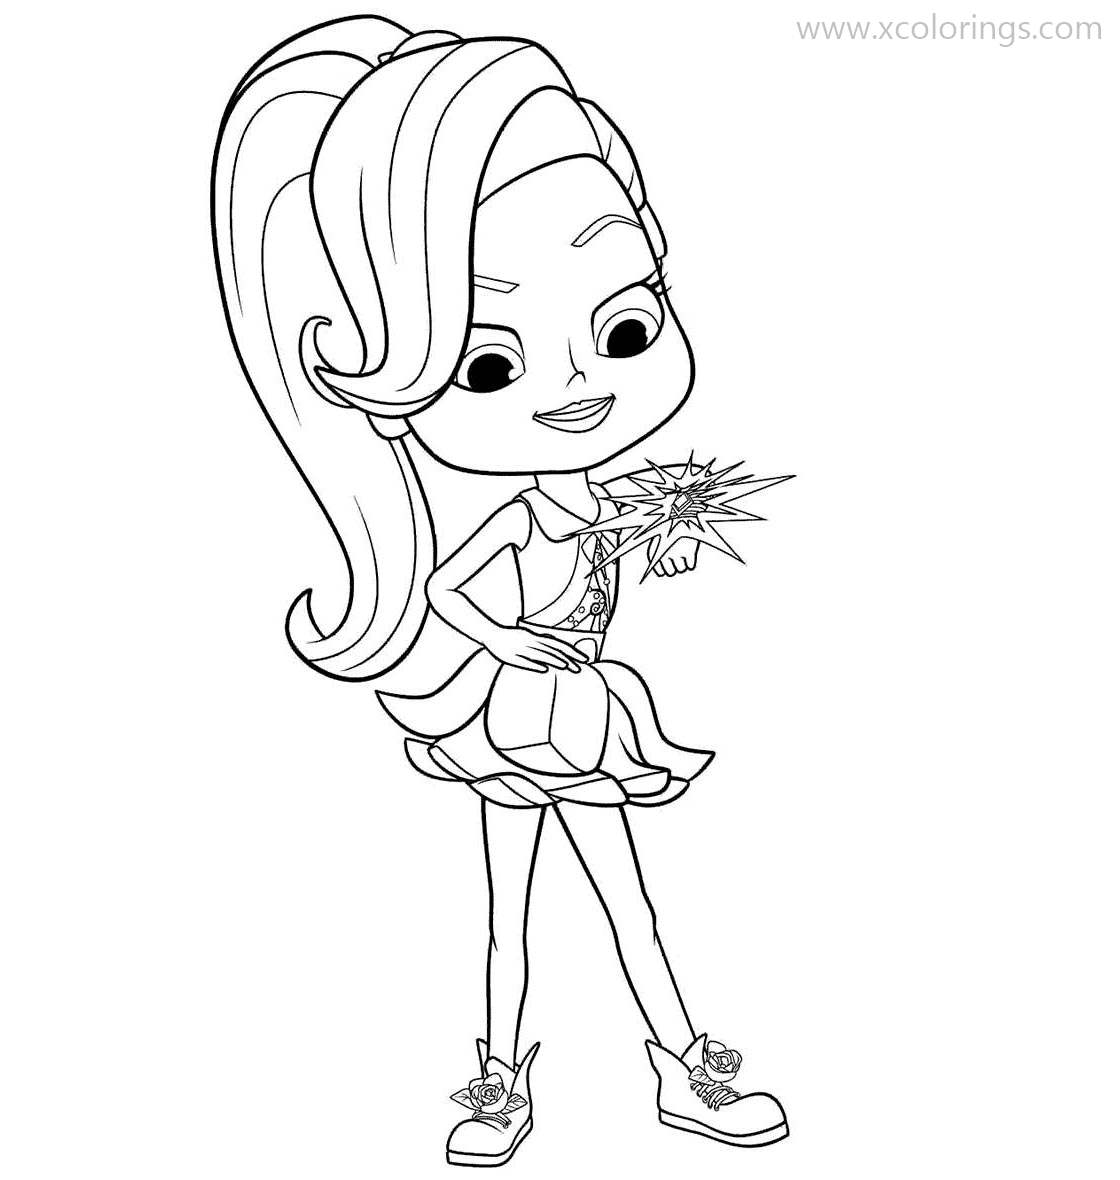 Free Rainbow Rangers Coloring Pages Rosie Redd with Super Strength printable